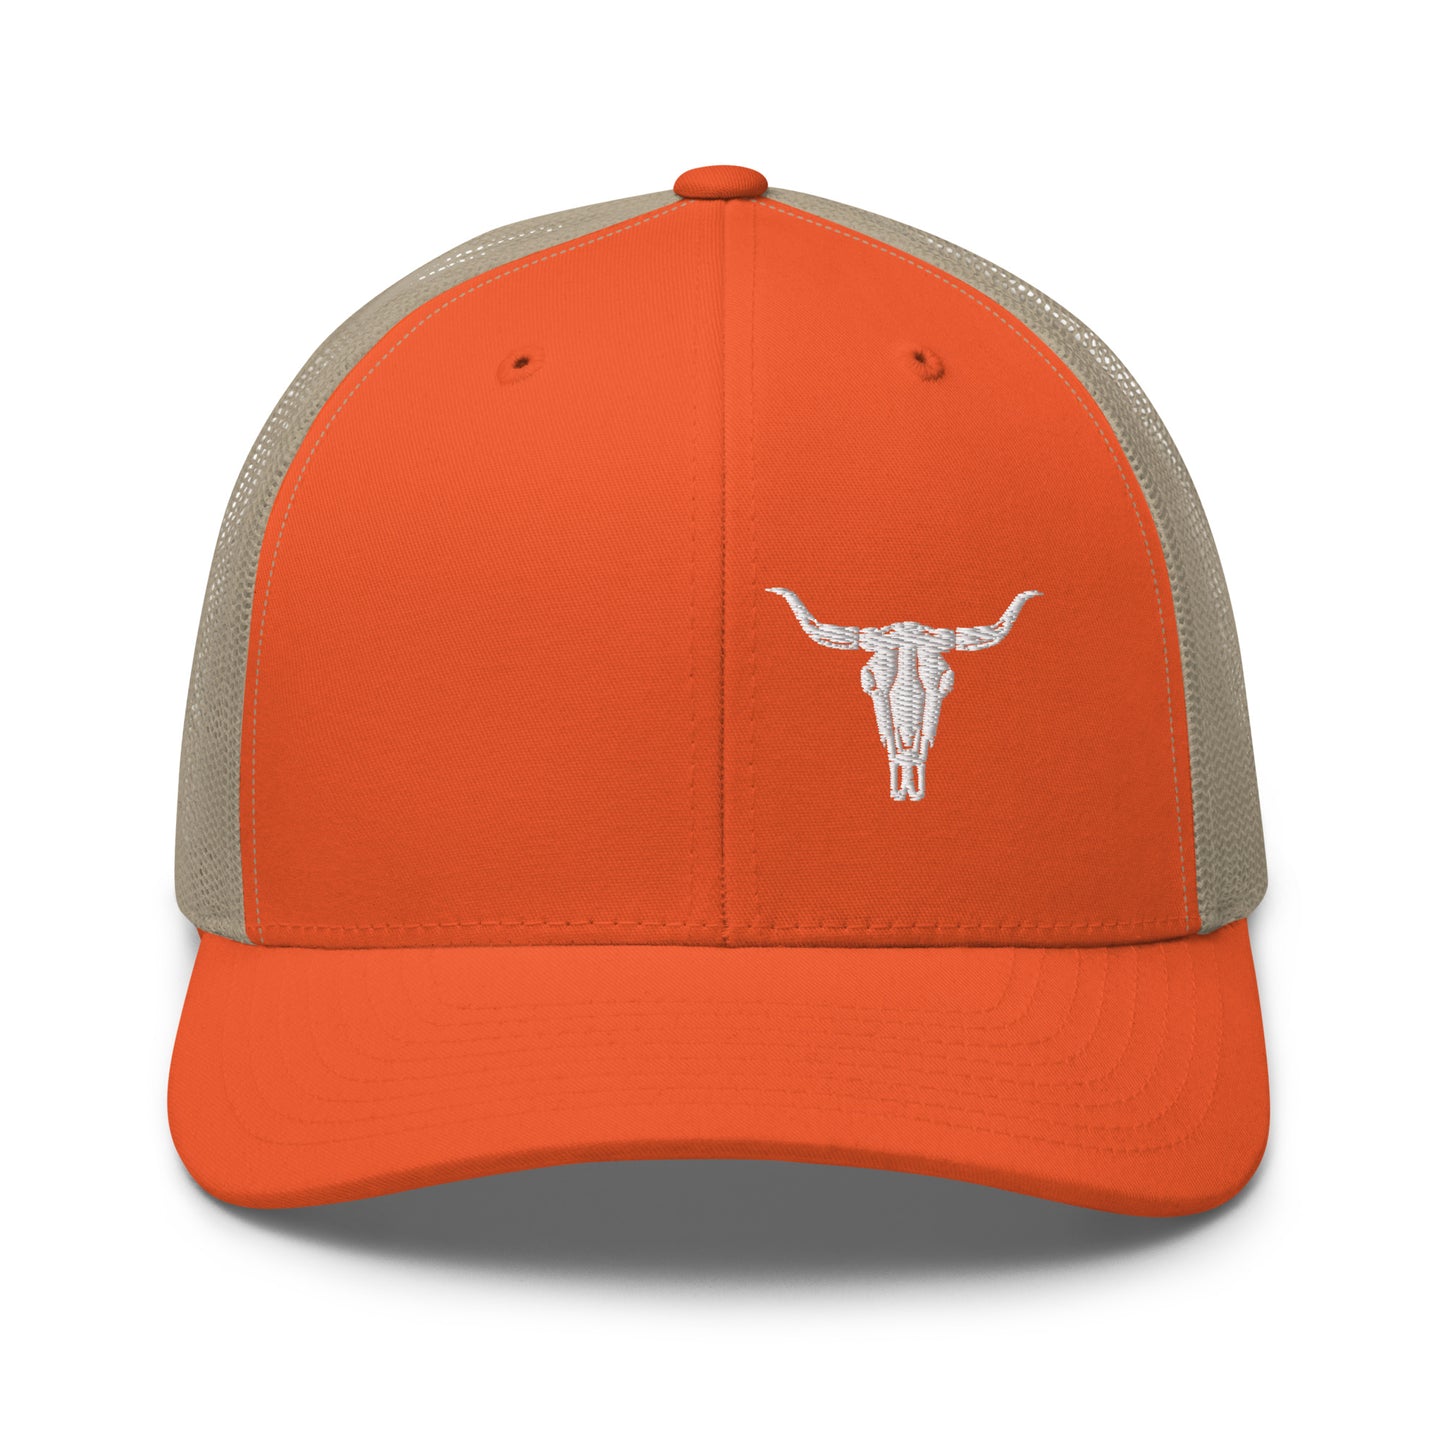 Steer Skull Hat.  A orange and beige Yupoong 6606 with steer skull on the right side panel.